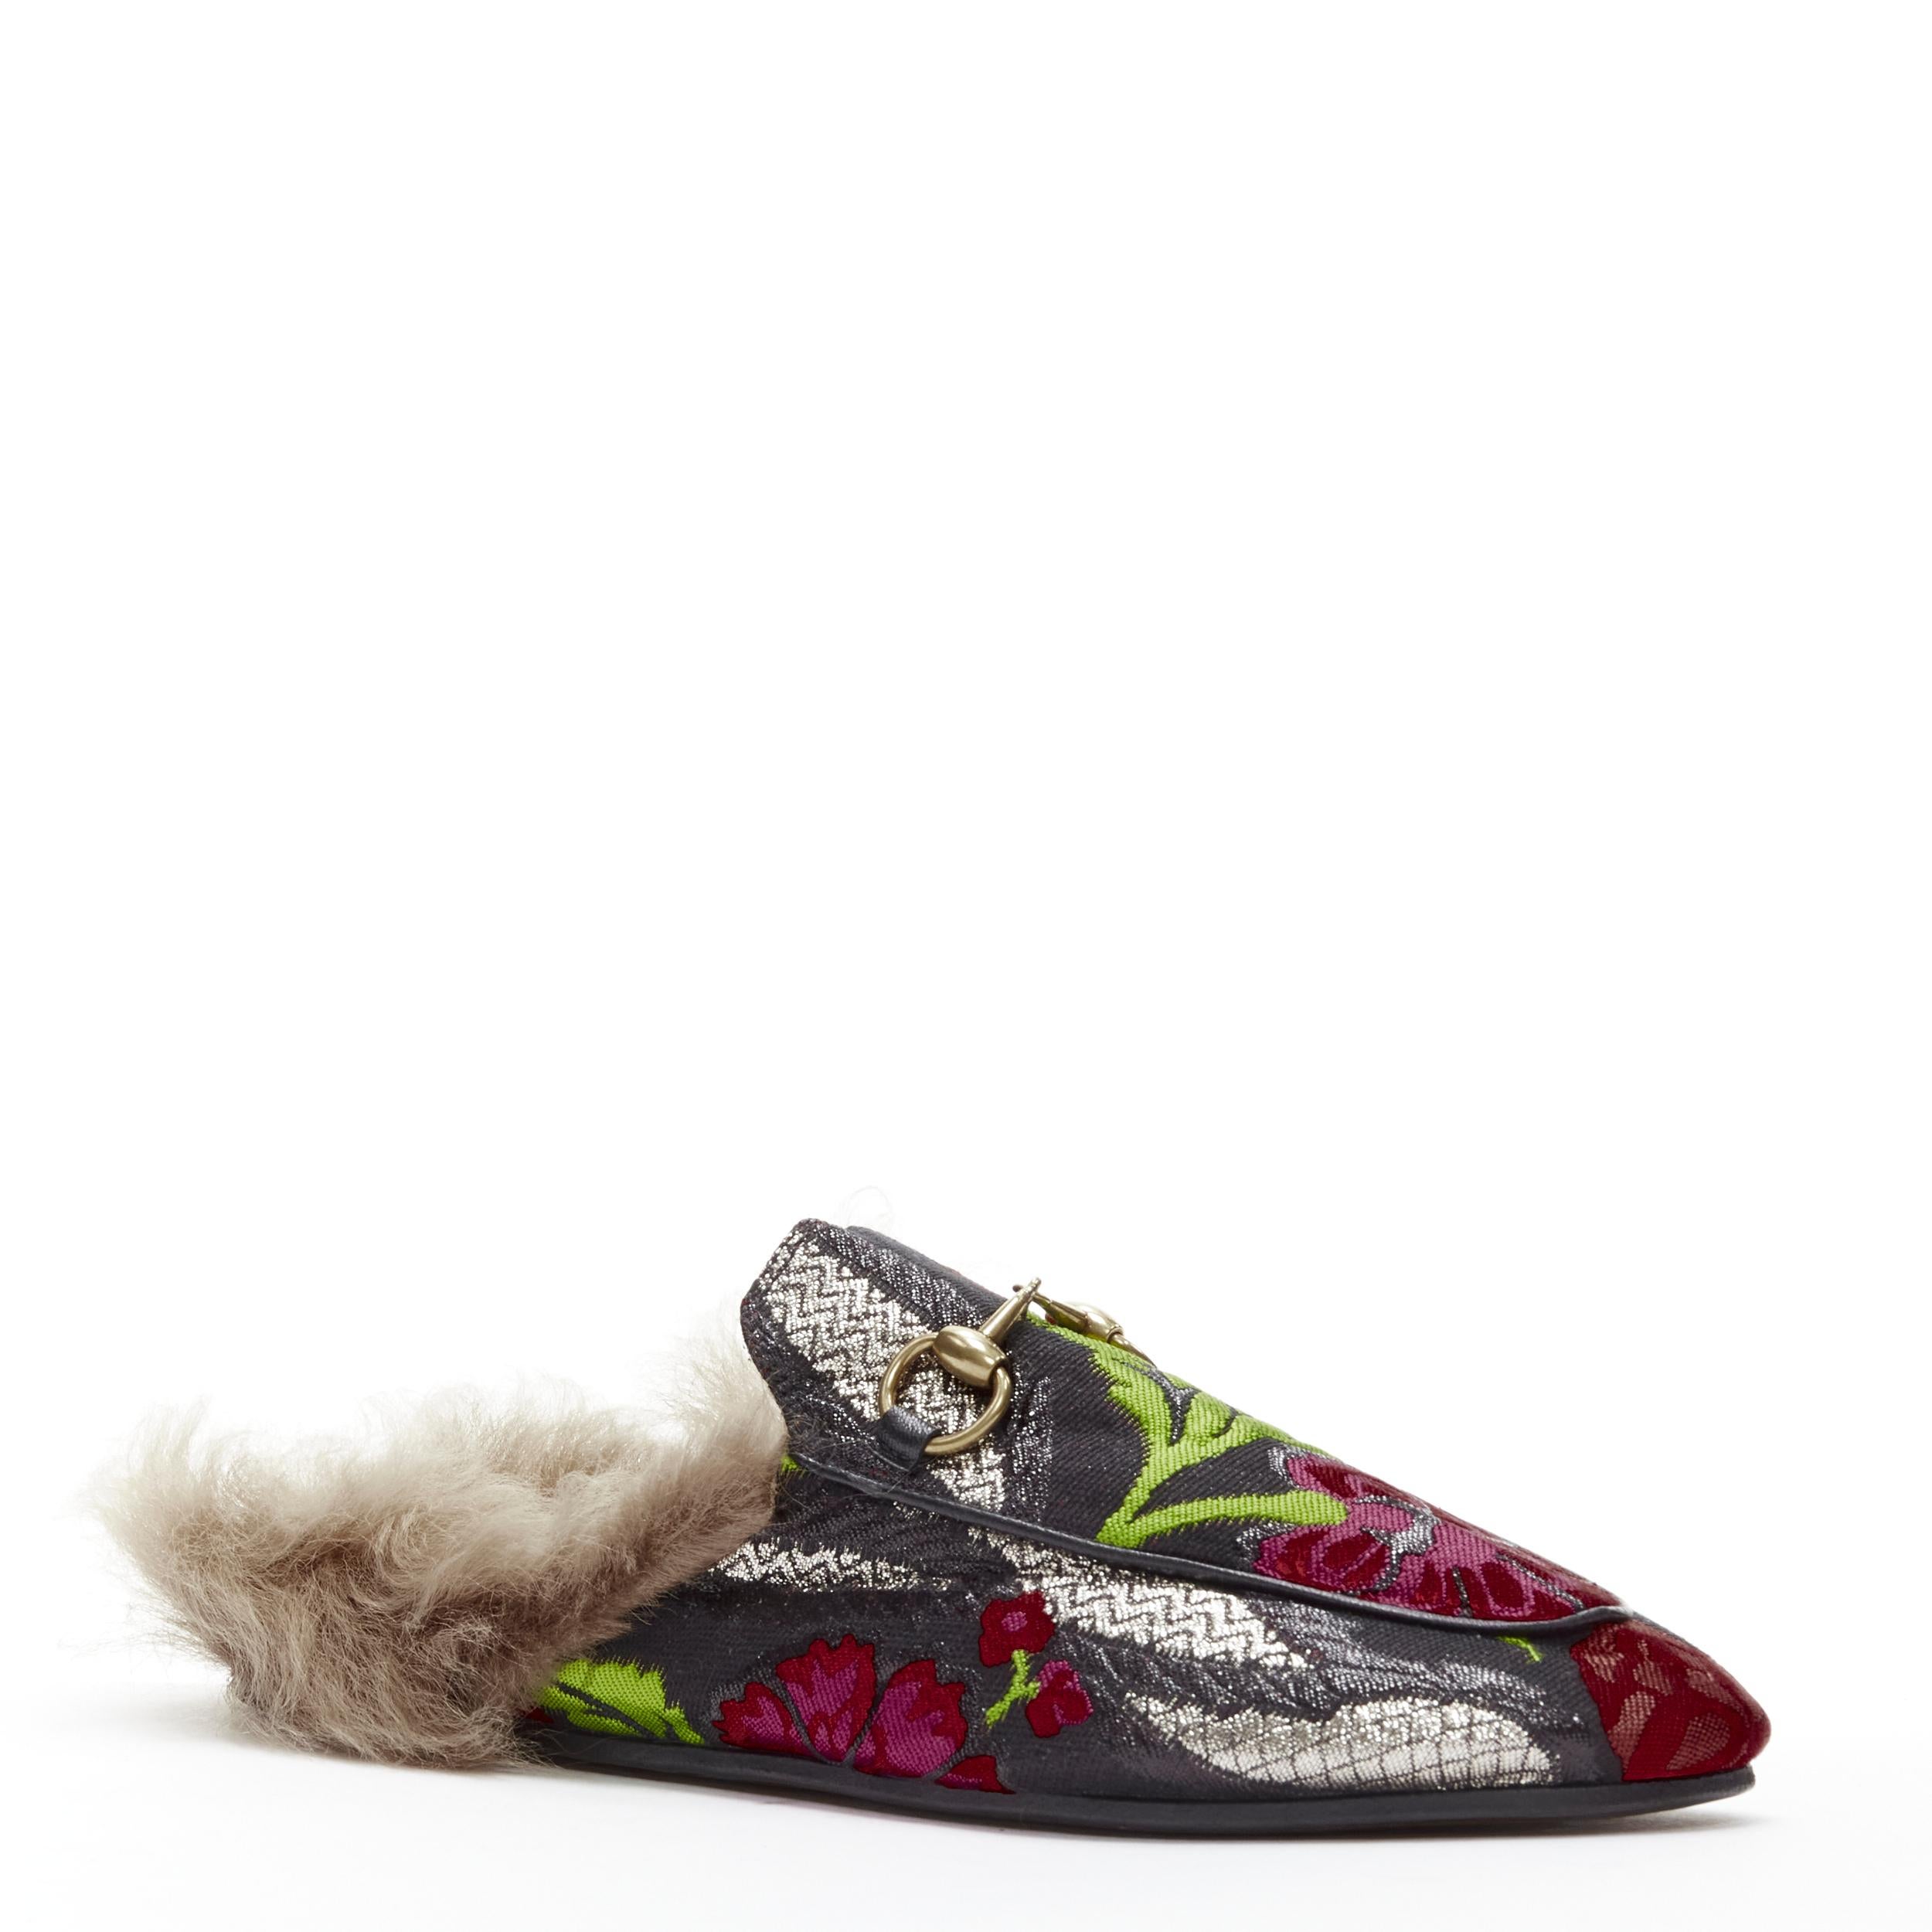 GUCCI Alessandro Michele Princetown floral jacquard fur lined loafer EU36
Reference: TGAS/B02020
Brand: Gucci
Designer: Alessandro Michele
Model: Princetown
Collection: Runway
Material: Fabric
Color: Multicolour
Pattern: Solid
Closure: Slip